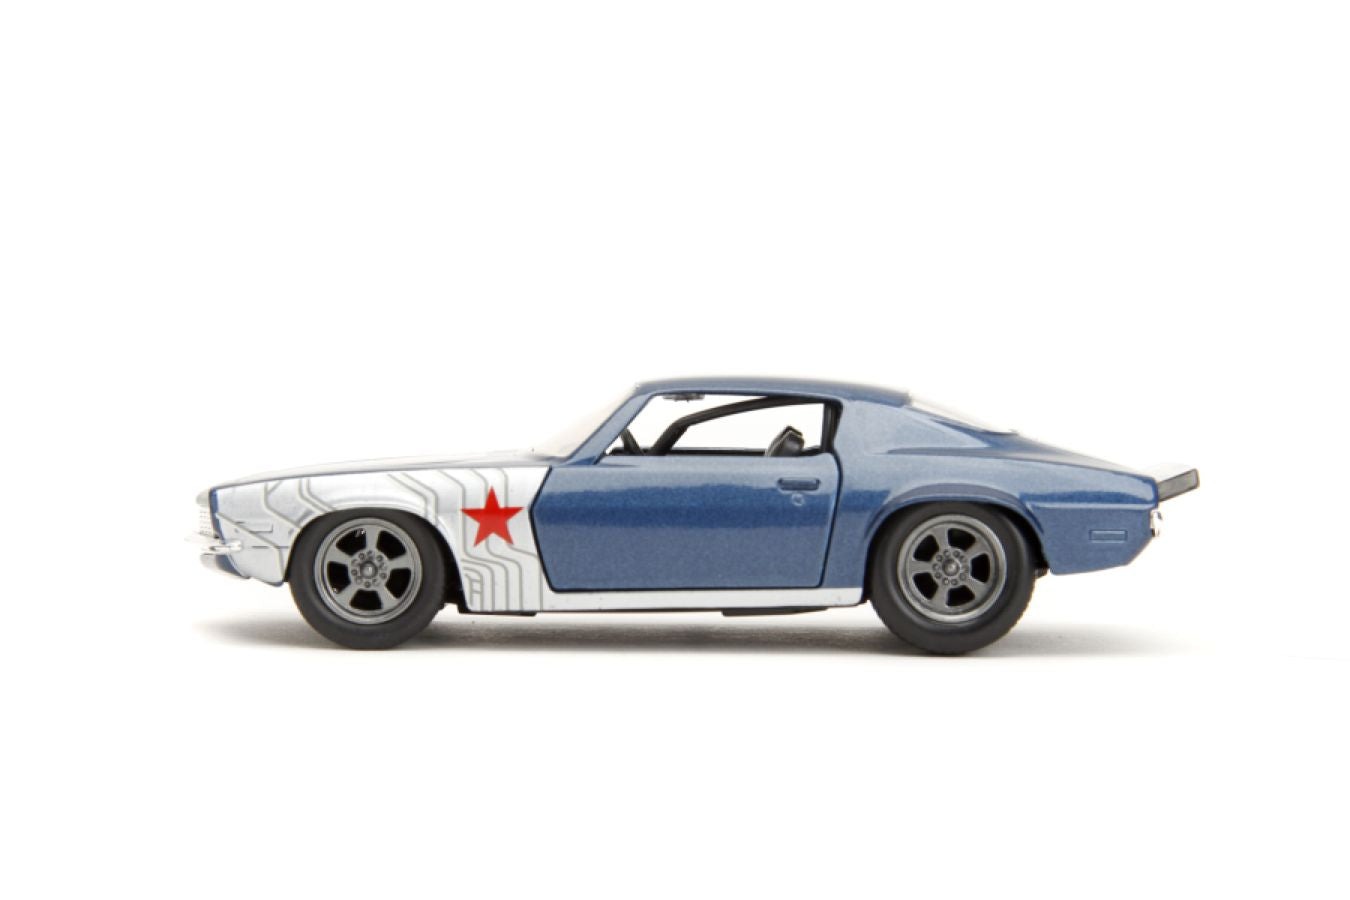 Marvel - 1973 Chev Camaro 1:32 Scale with Winter Soldier Figure